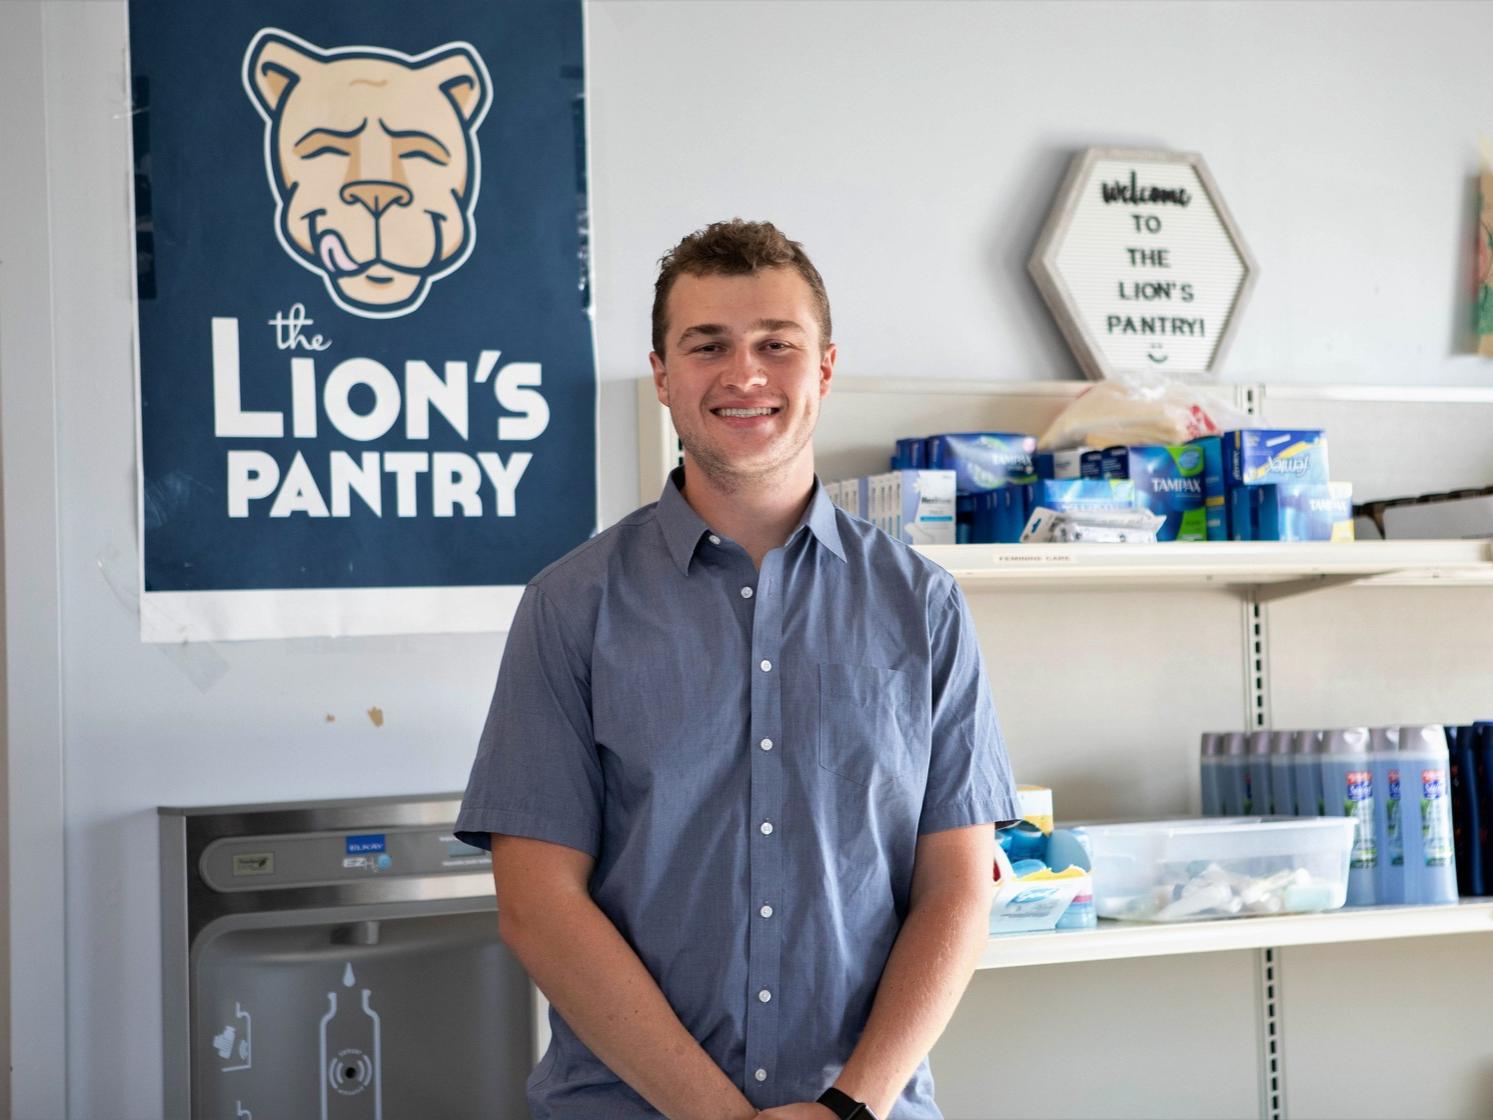 Fighting food insecurity: Student leads Penn State Lion’s Pantry